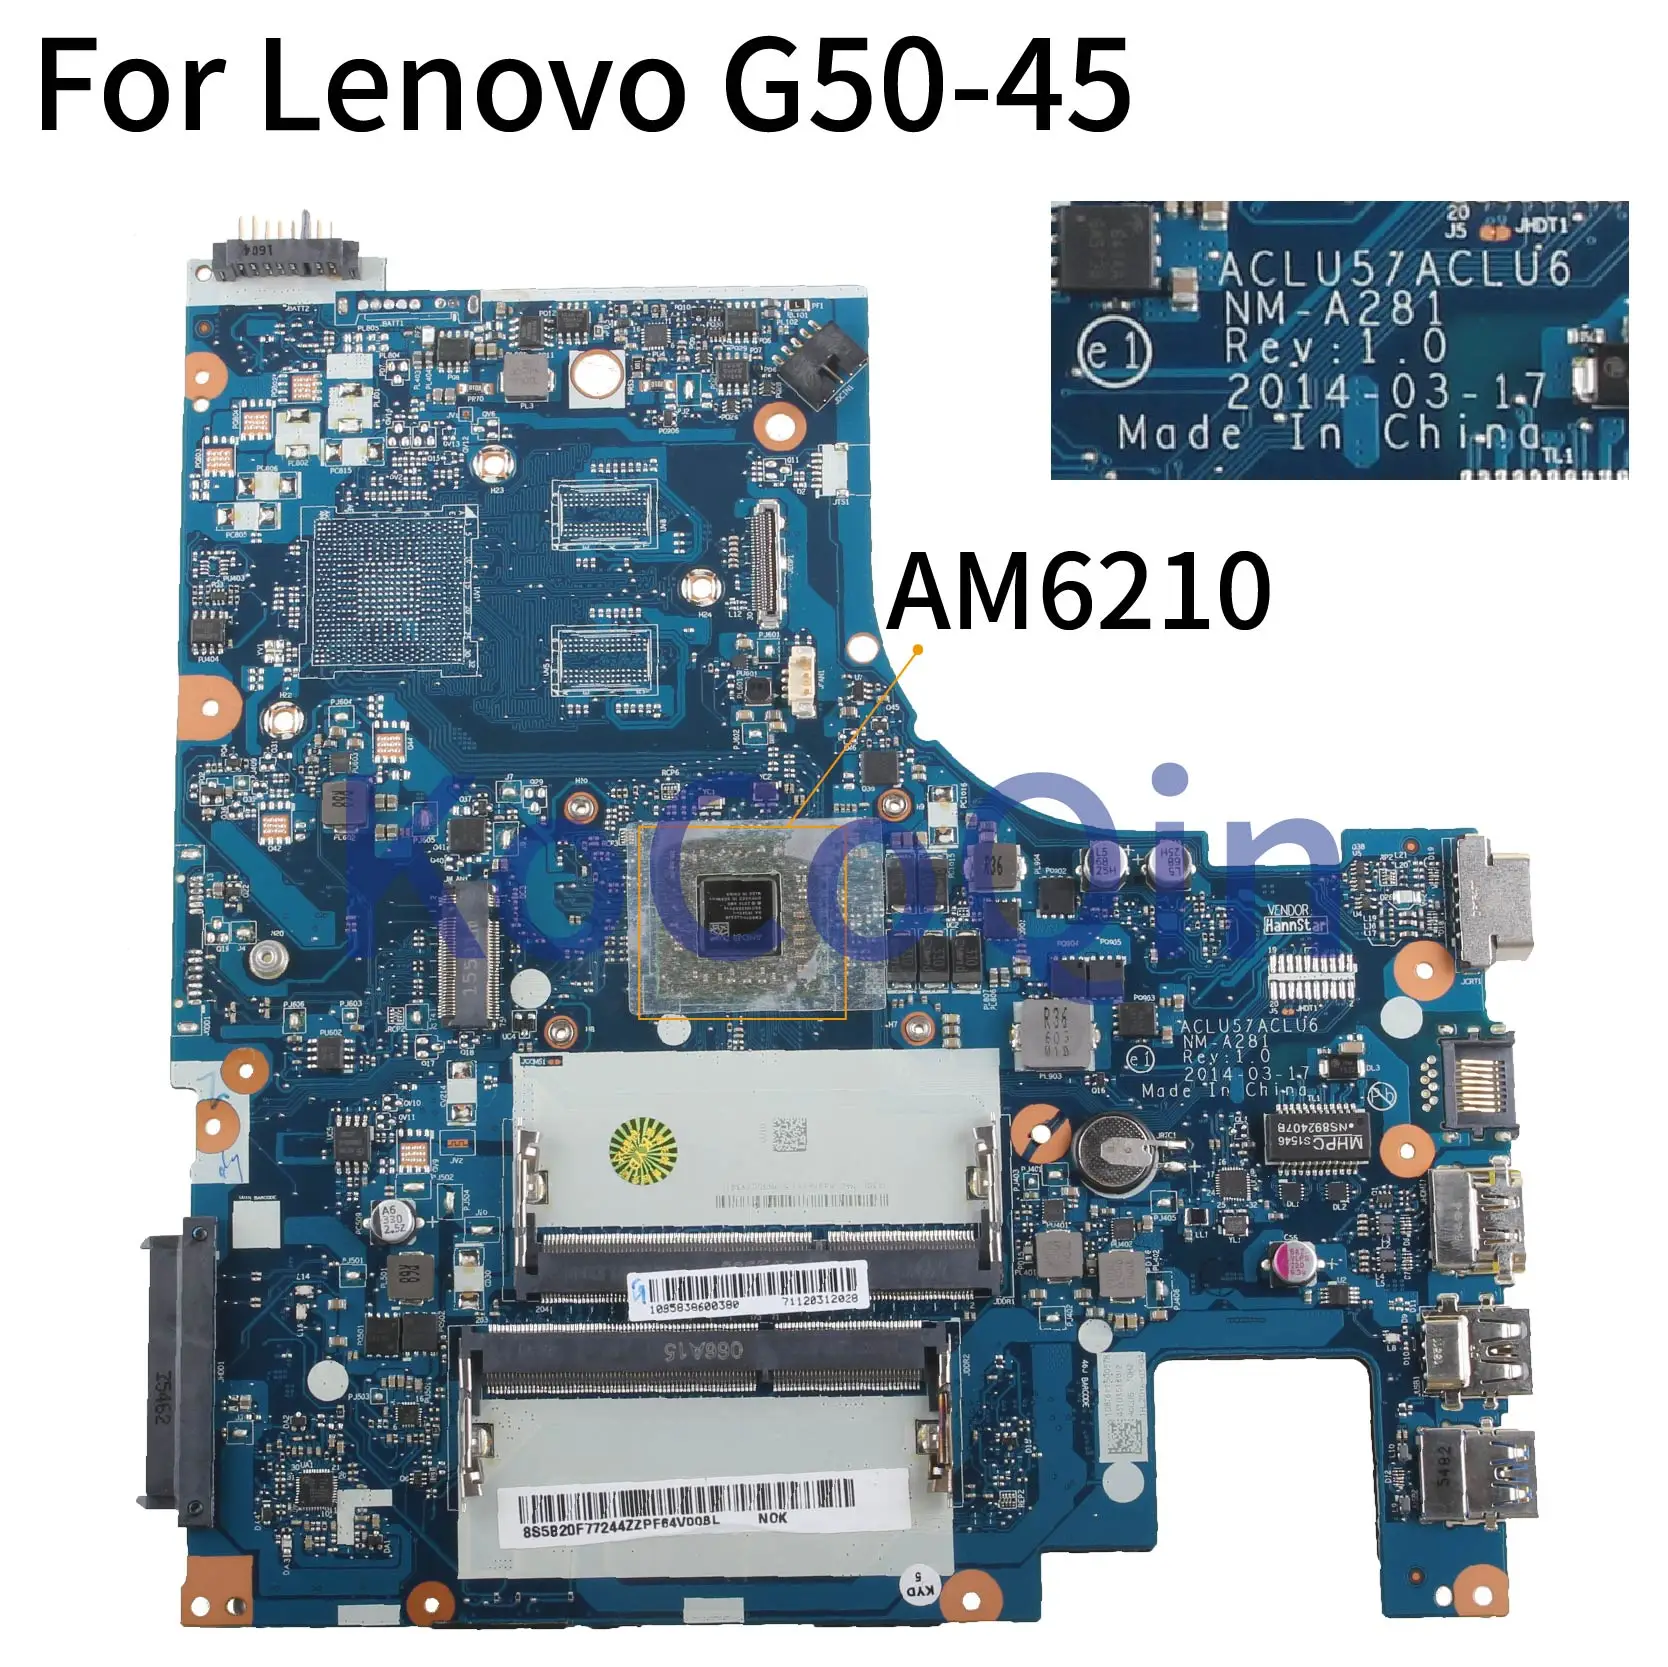 KoCoQin Laptop motherboard For LENOVO G50-45 Mainboard ACLU5 NM-A281 AM6210